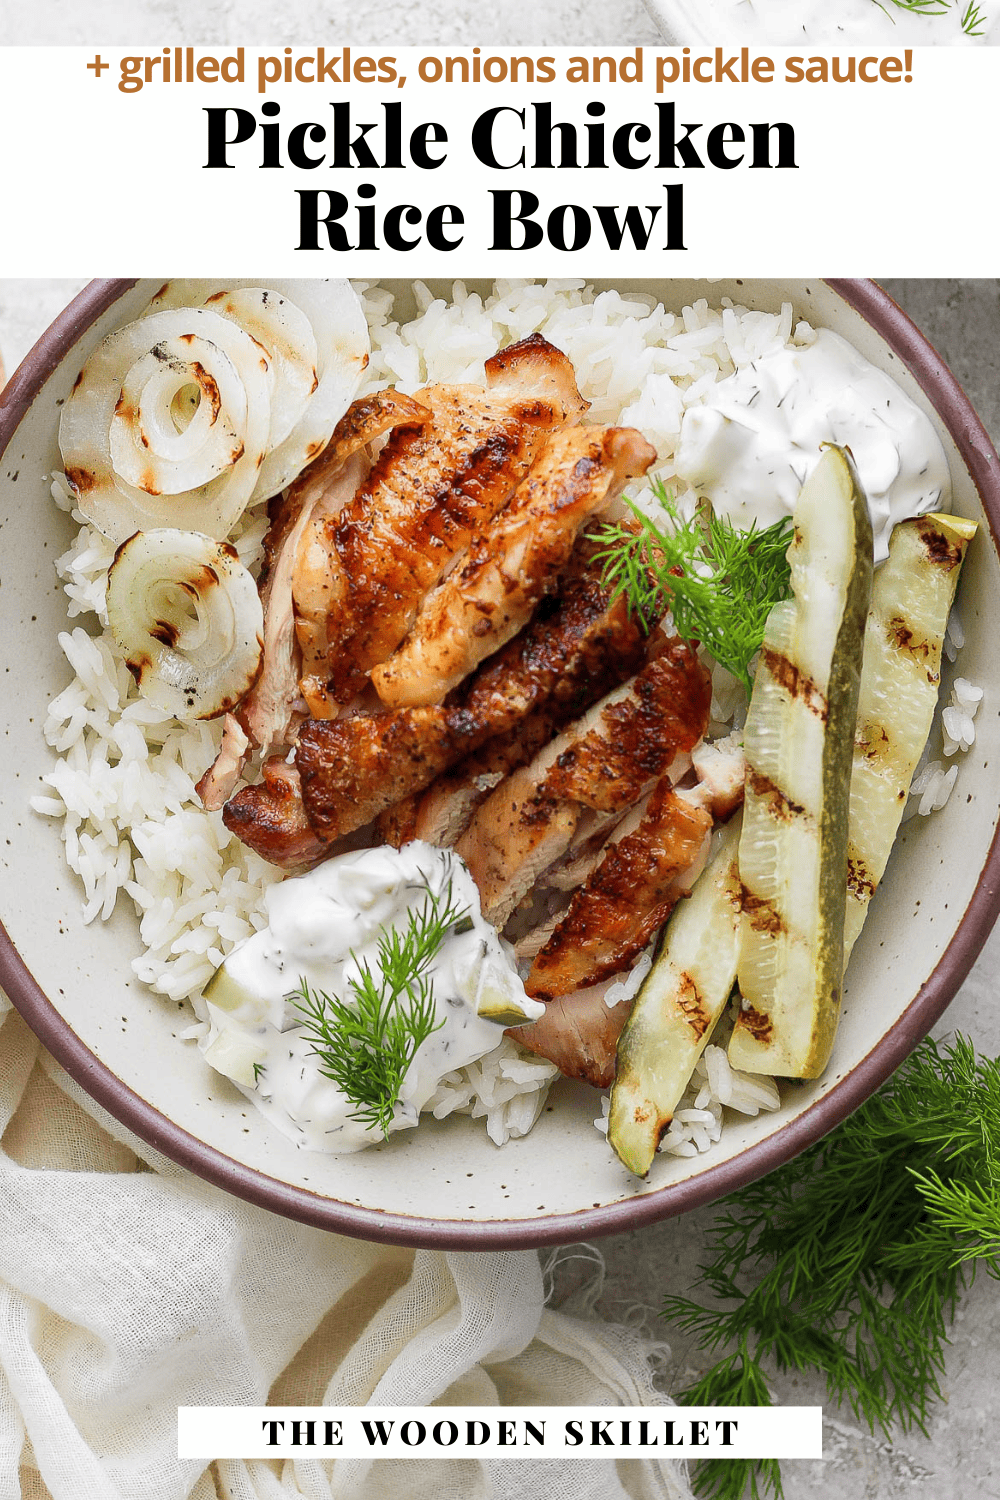 Pinterest image for a pickle chicken rice bowl.